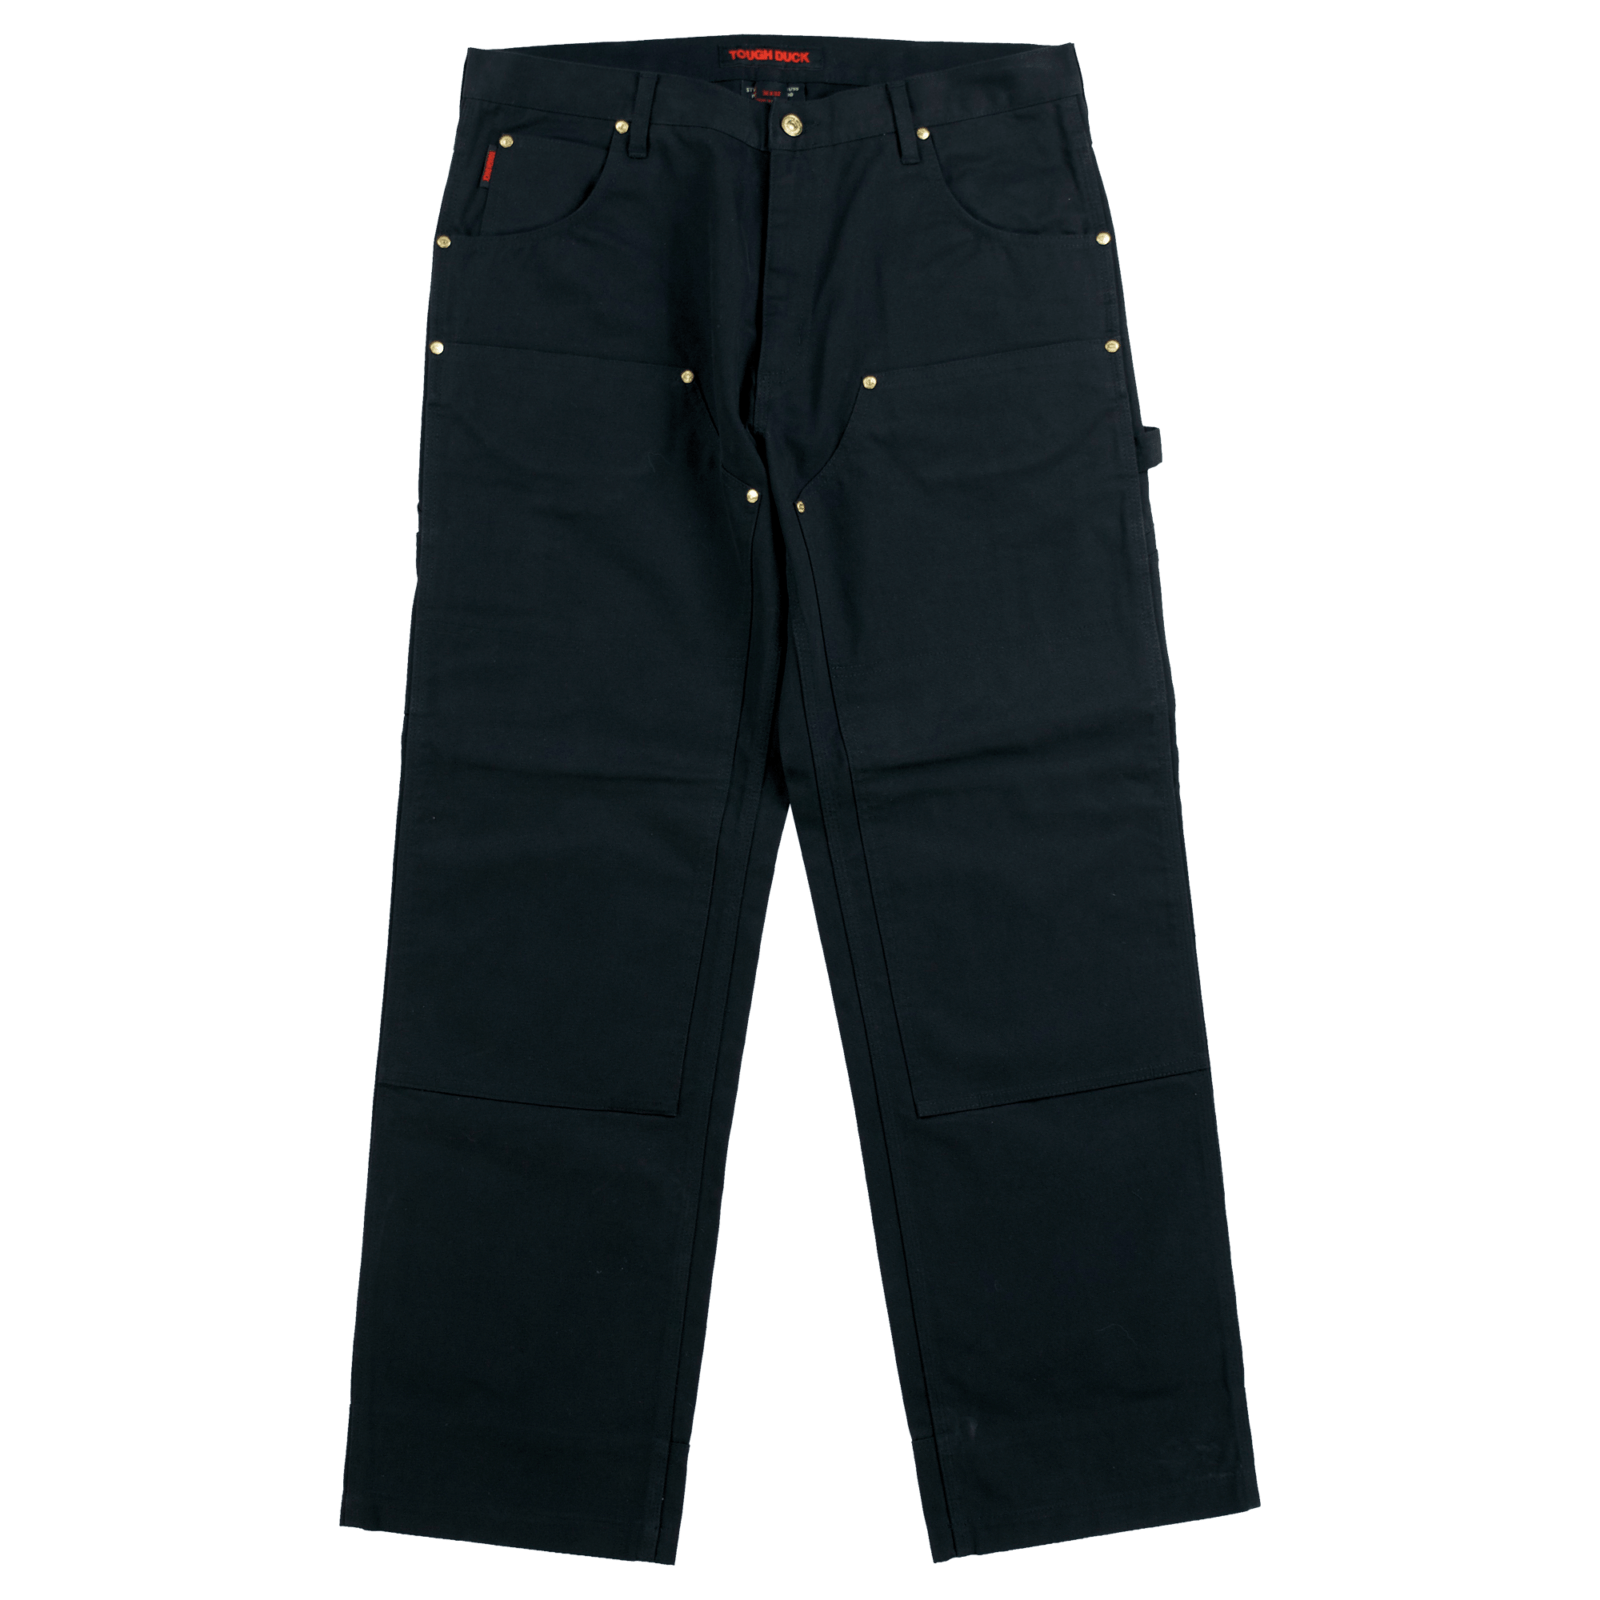 Double front work pants by carhartt for men black size